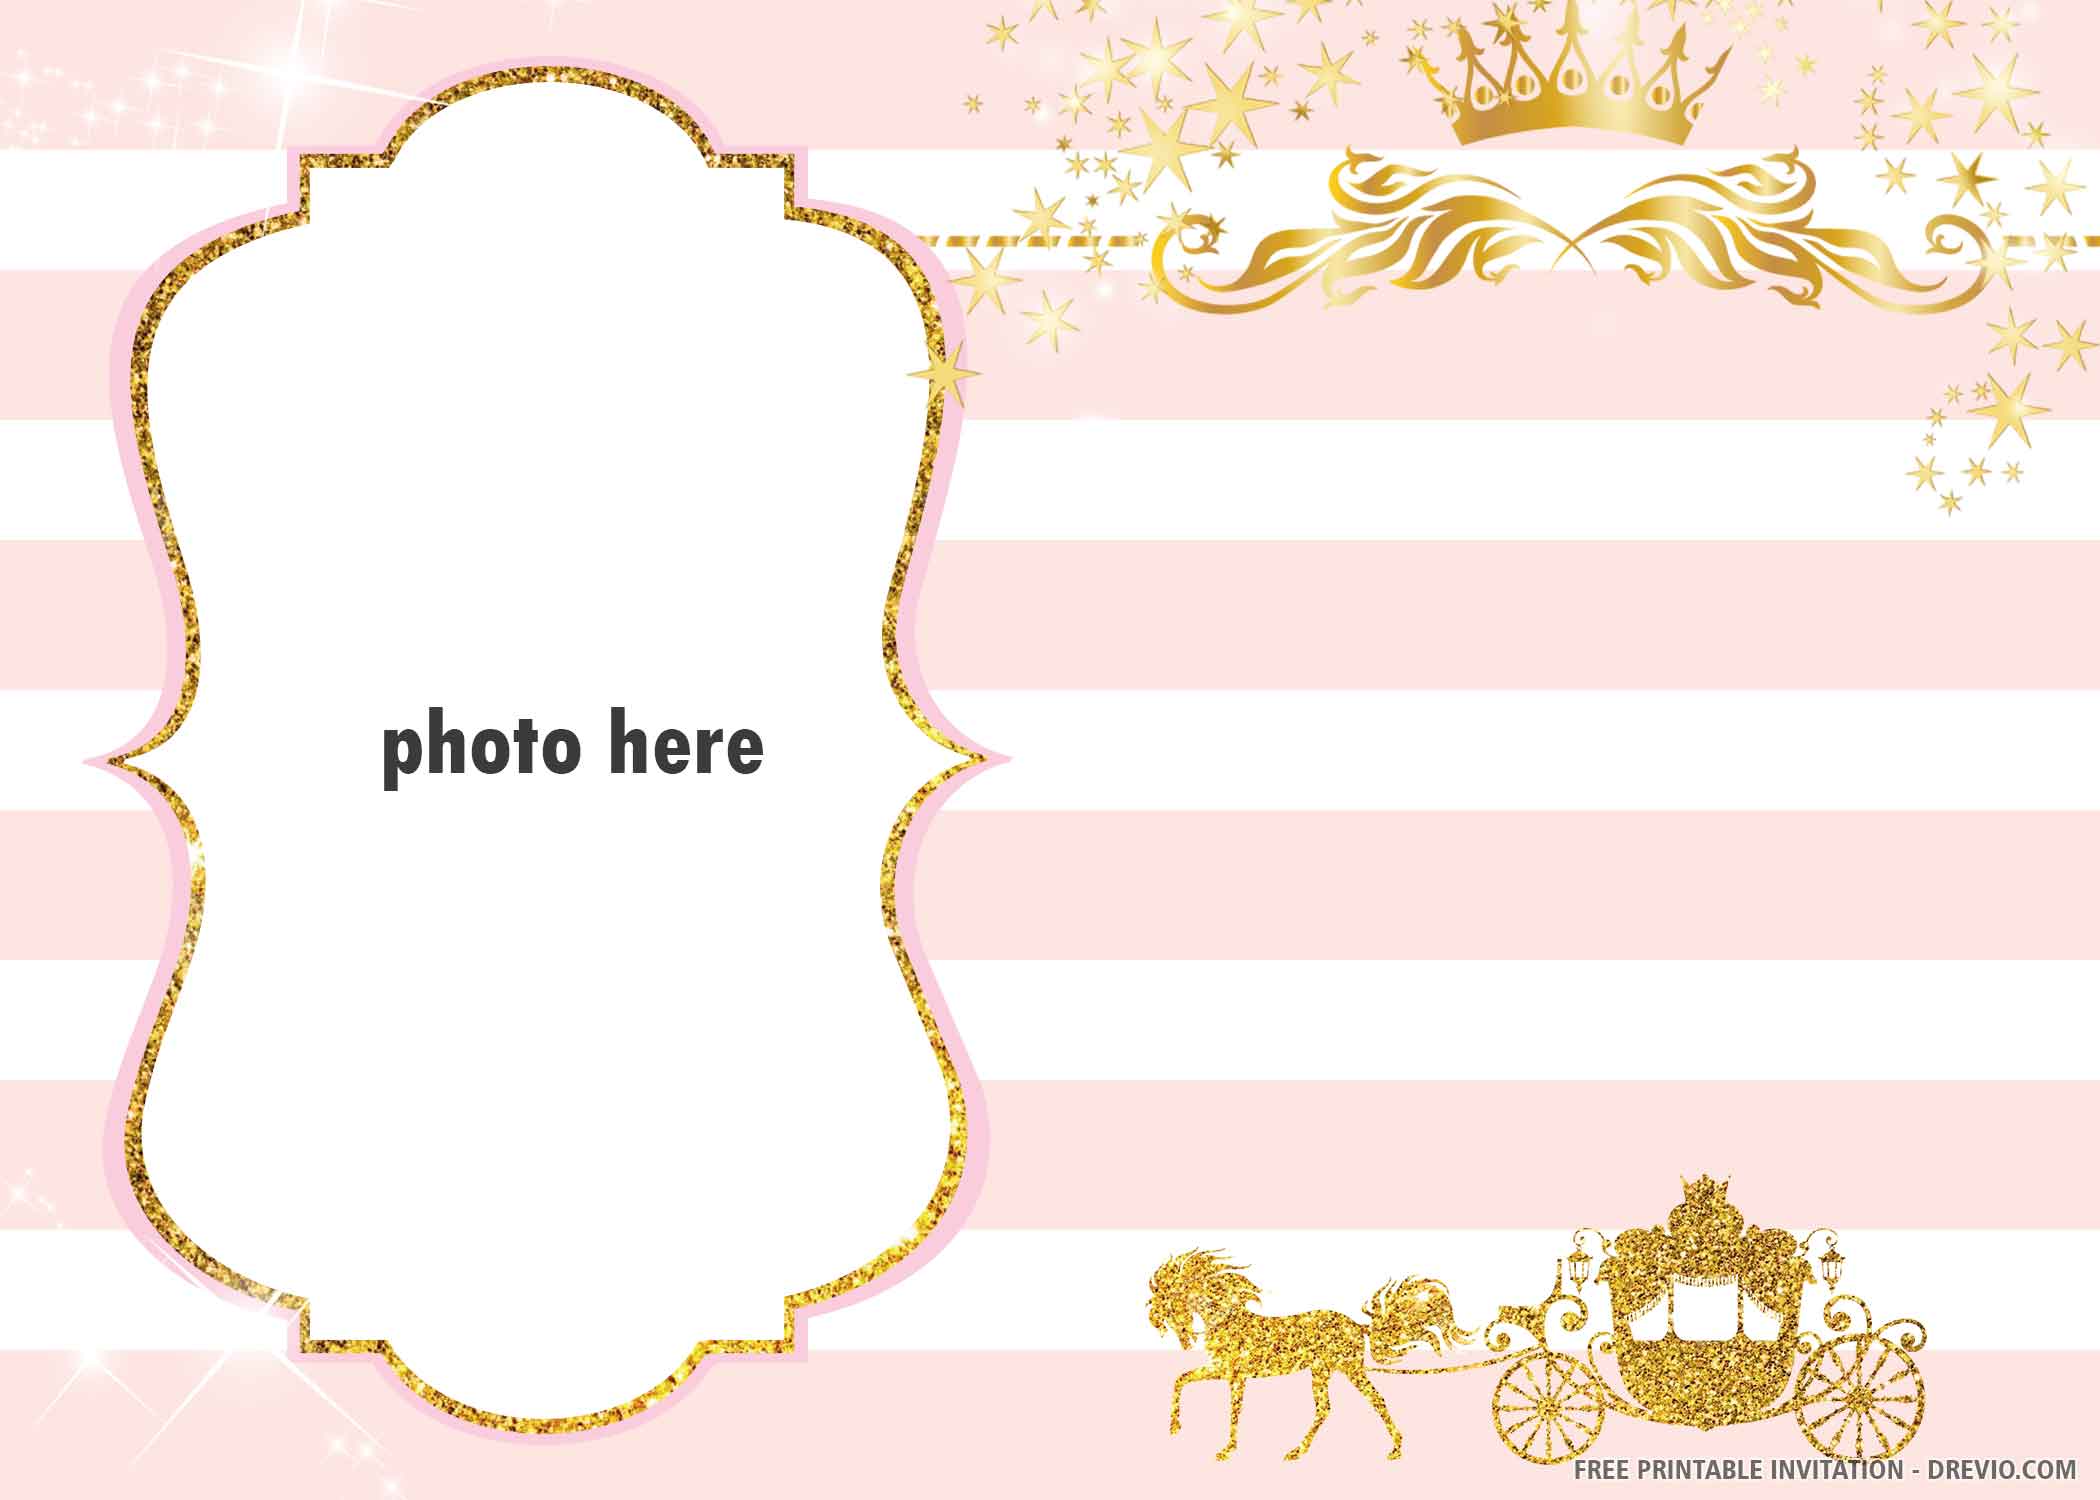 Free Printable Golden Carriage Invitation Template Download Hundreds Free Printable Birthday Invitation Templates